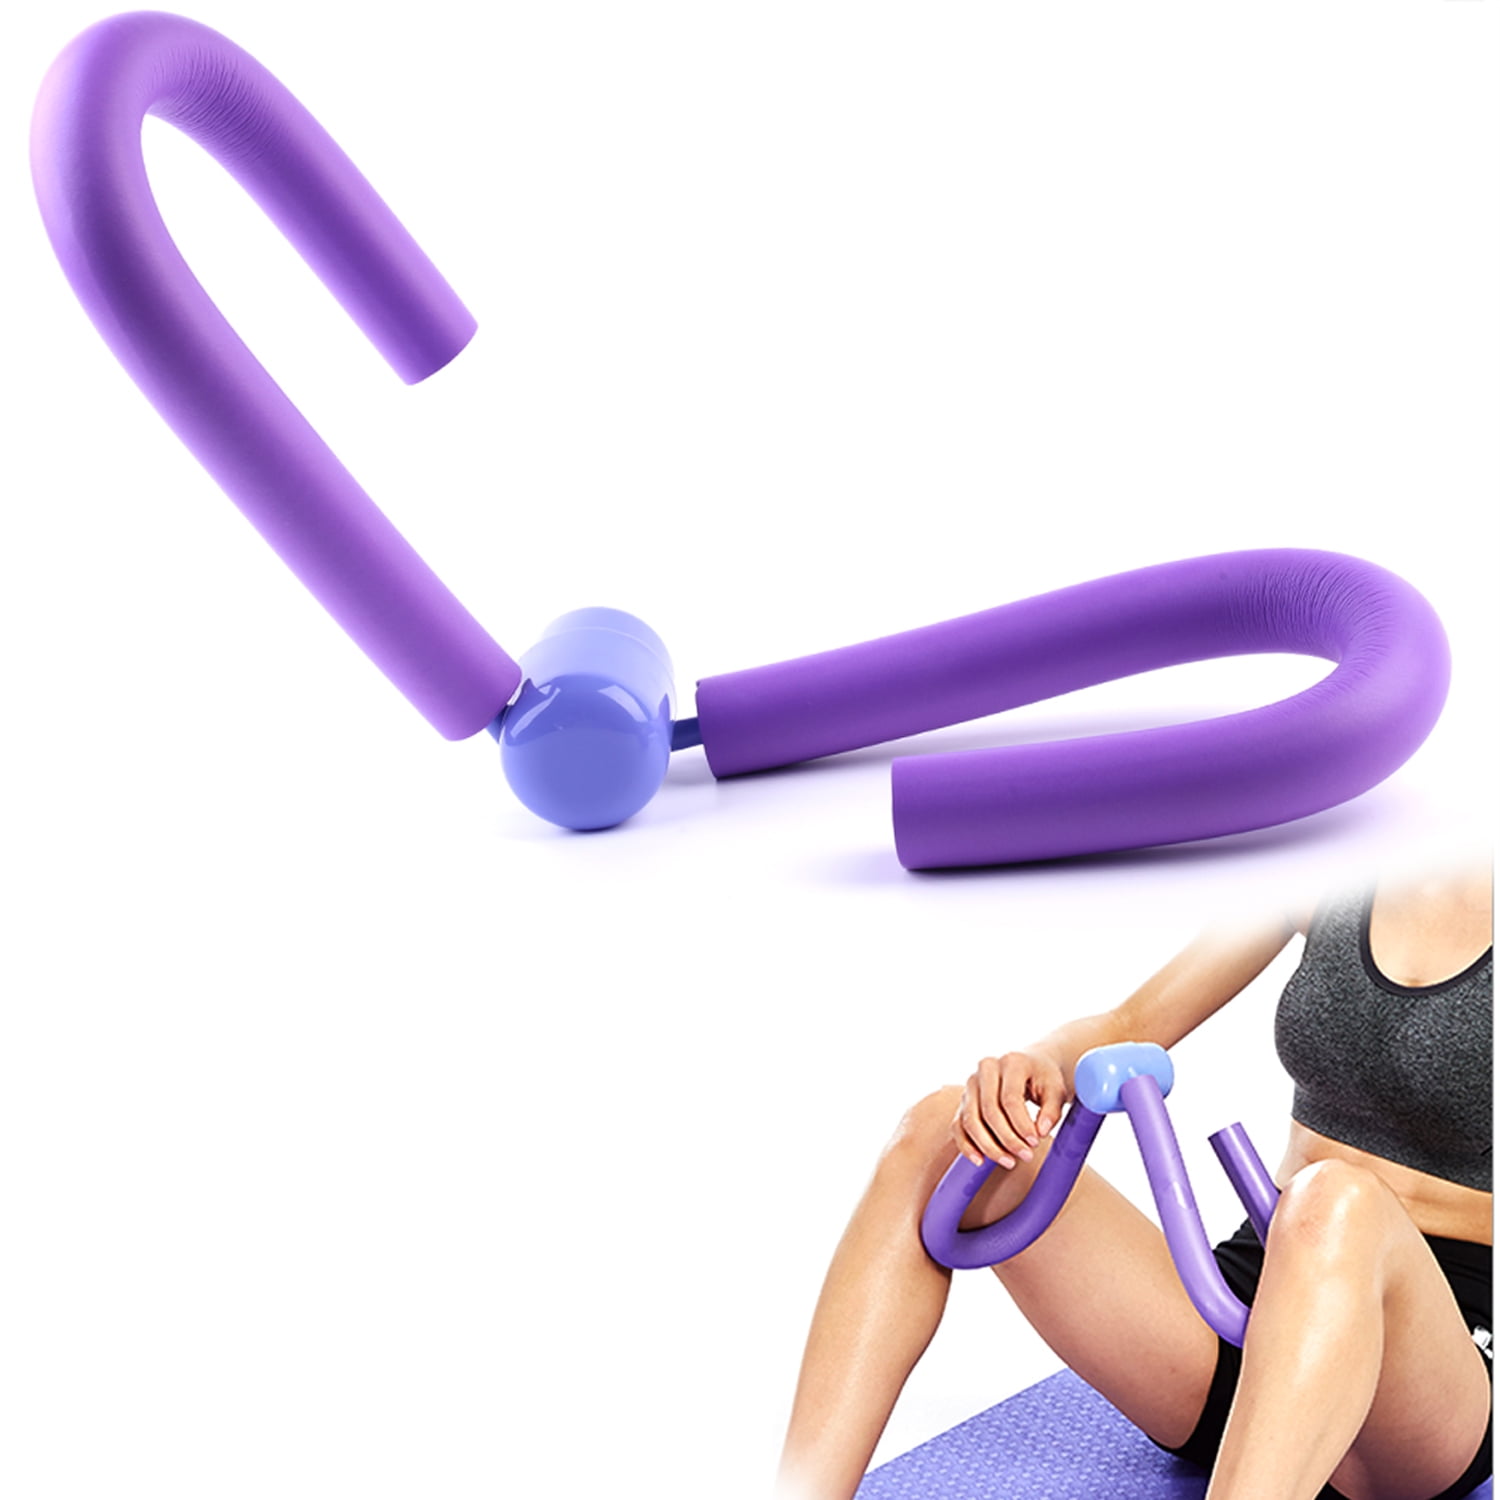 Home Gym Equipment for Best Slimming Thin Thighs Leg Pedal Rally Stovepipe Clip Devic Shape and Firm Your Inner and Outer Thigh Thigh Master/Thigh Trimmer/Leg Workout Exerciser Tone